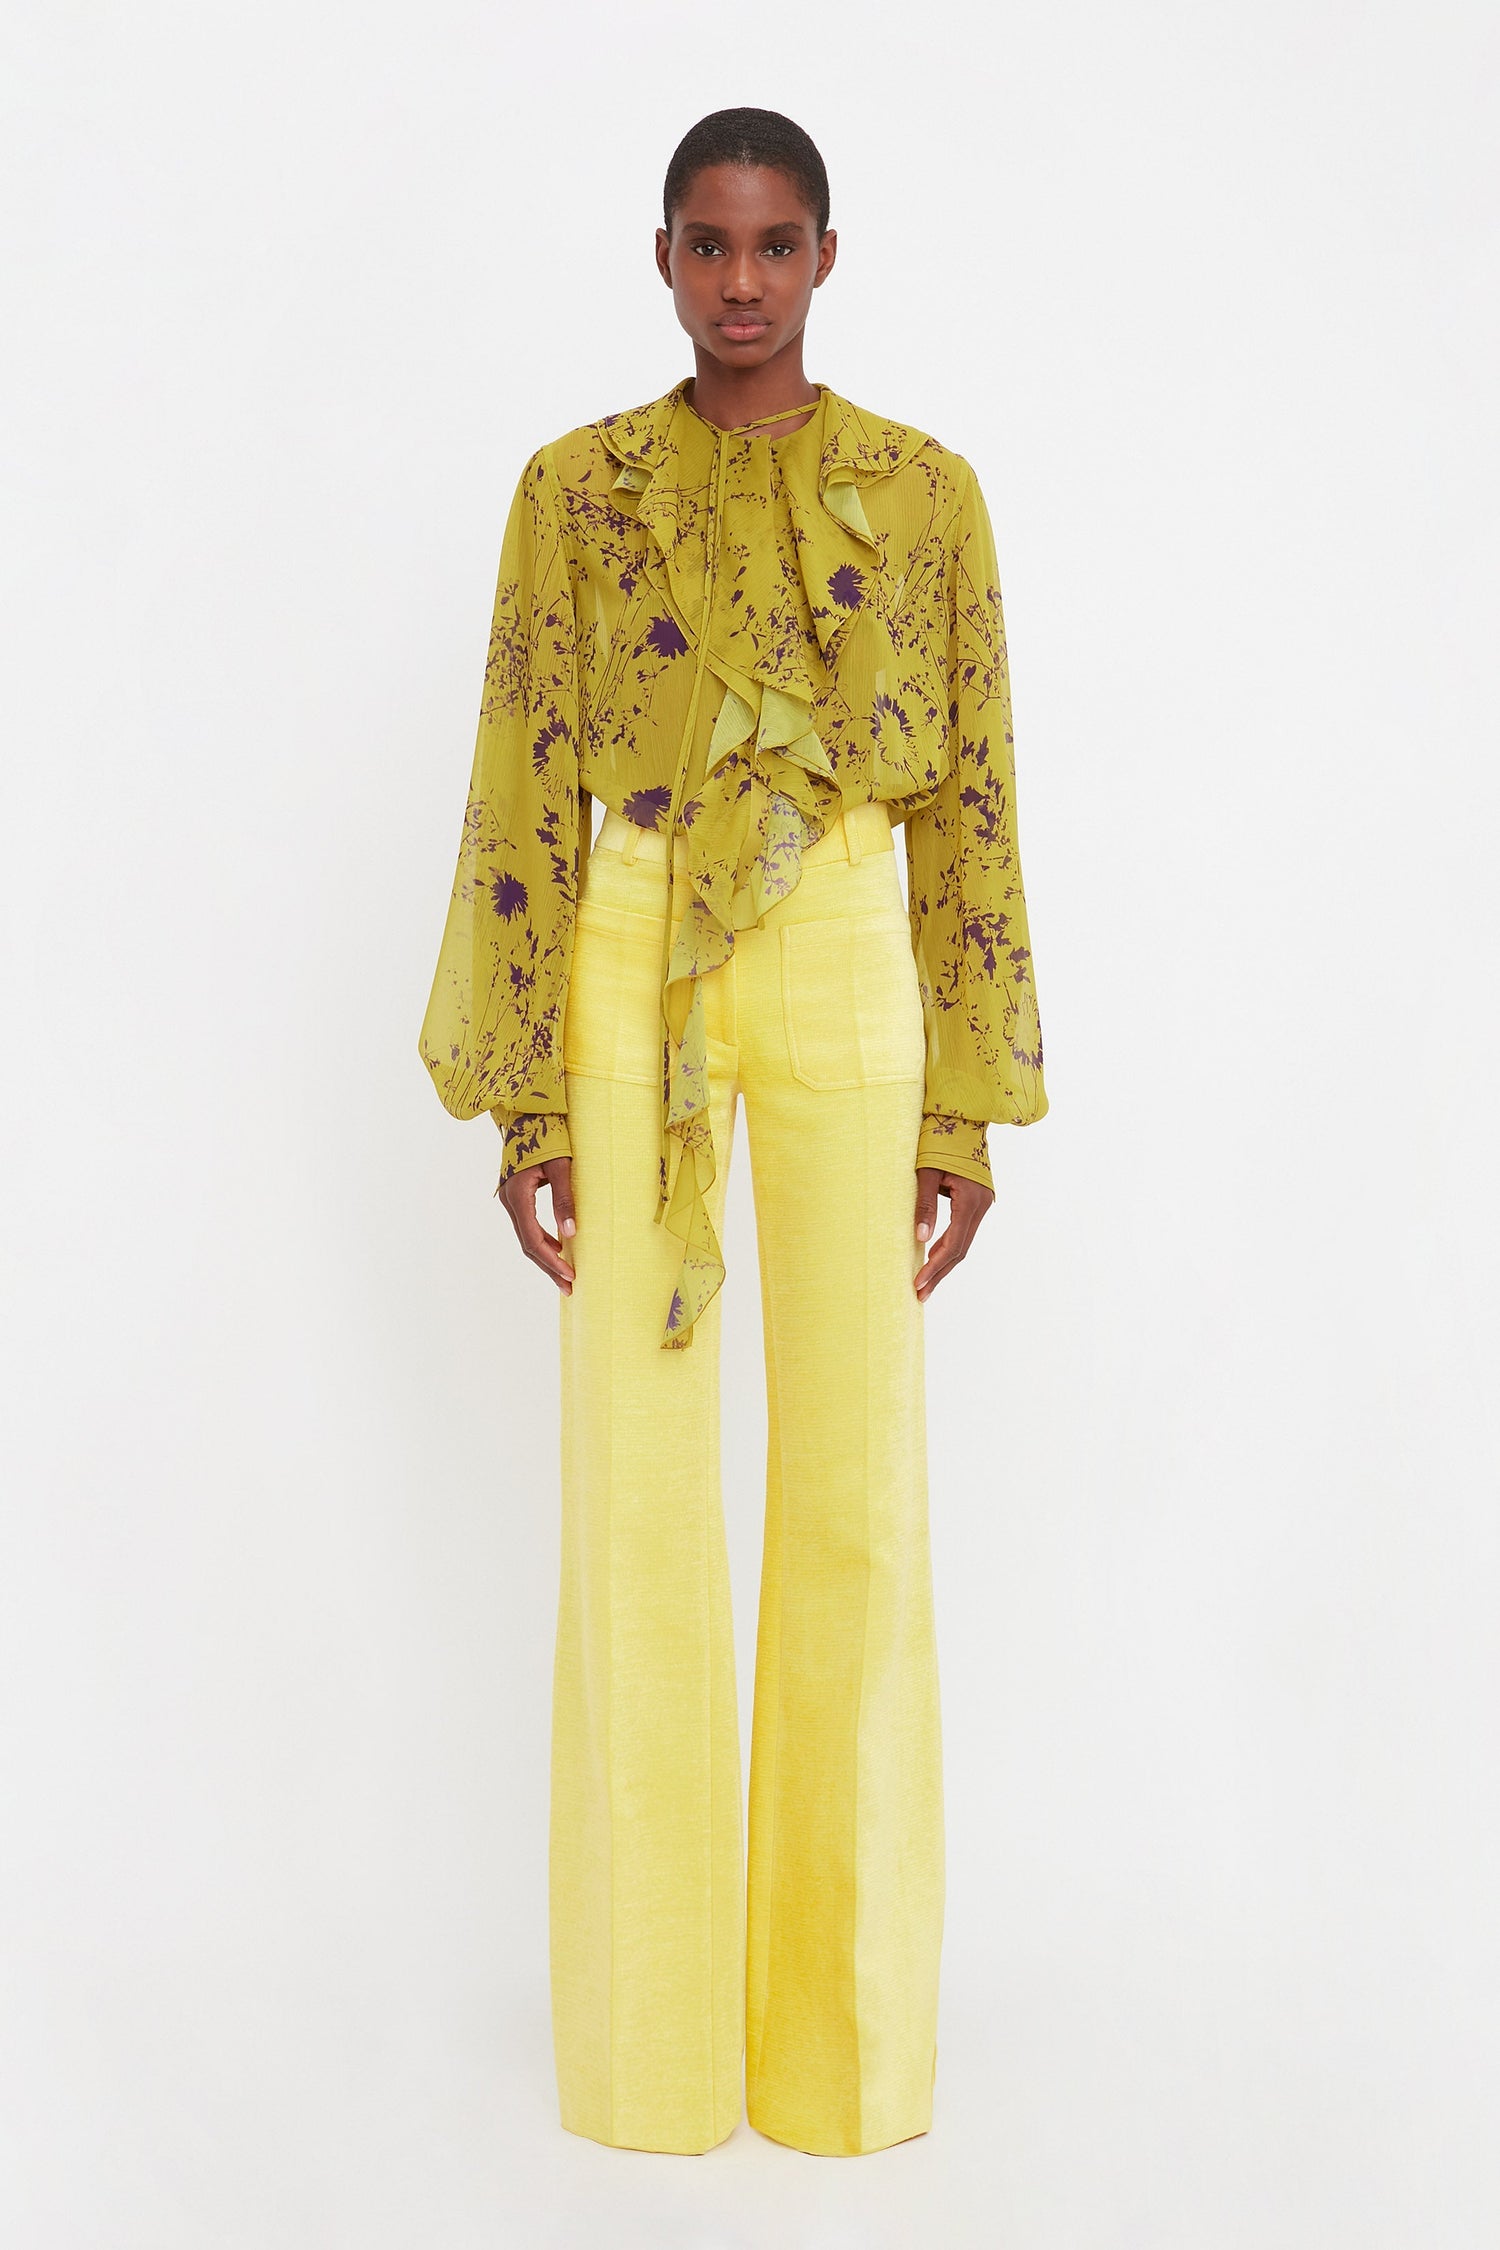 Model wears the Alina tailored trousers in a bright sunflower yellow. These bright yellow wide leg trousers have front detail pockets and a flared hem, made from durable recycled polyester.